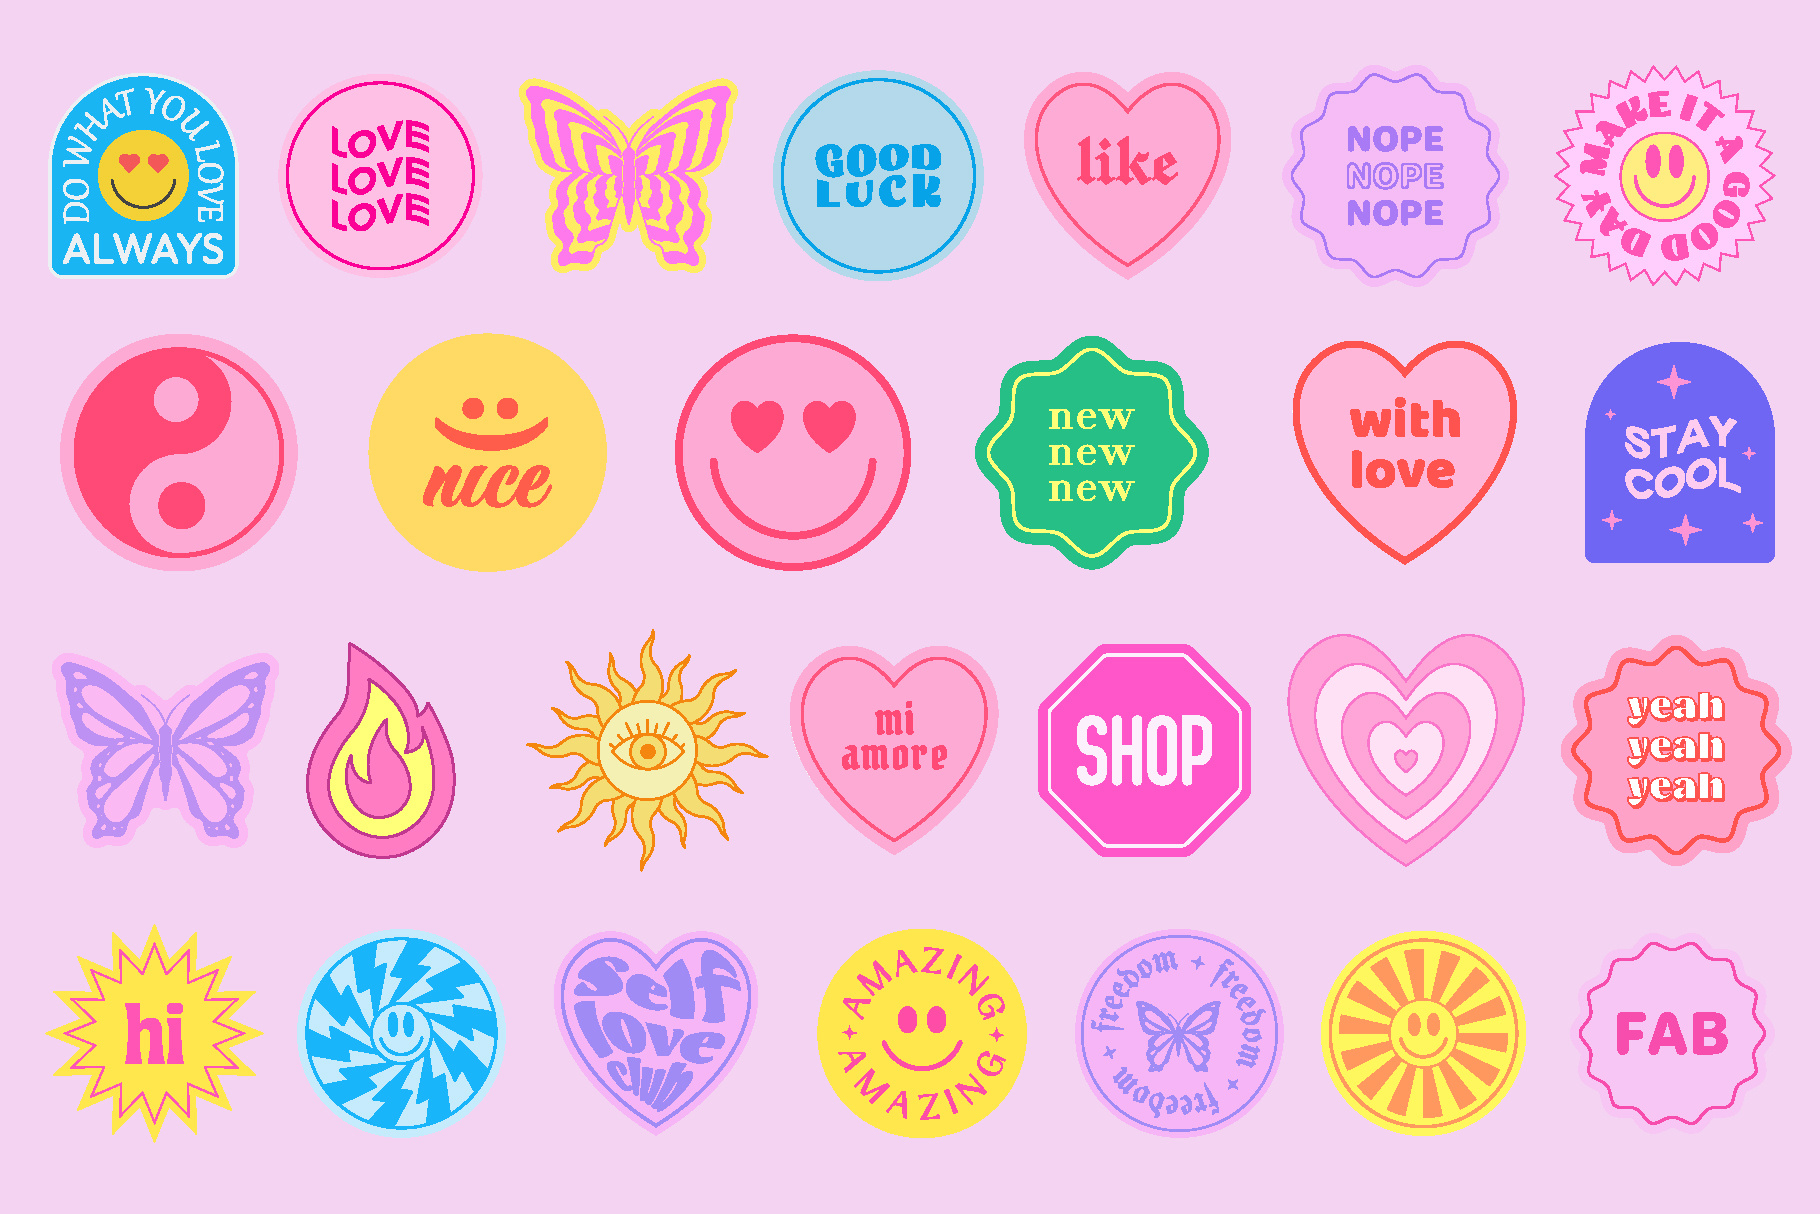 Y2K STICKERS PACK. COOL POP ART PATCHES. by Craftlove on Dribbble